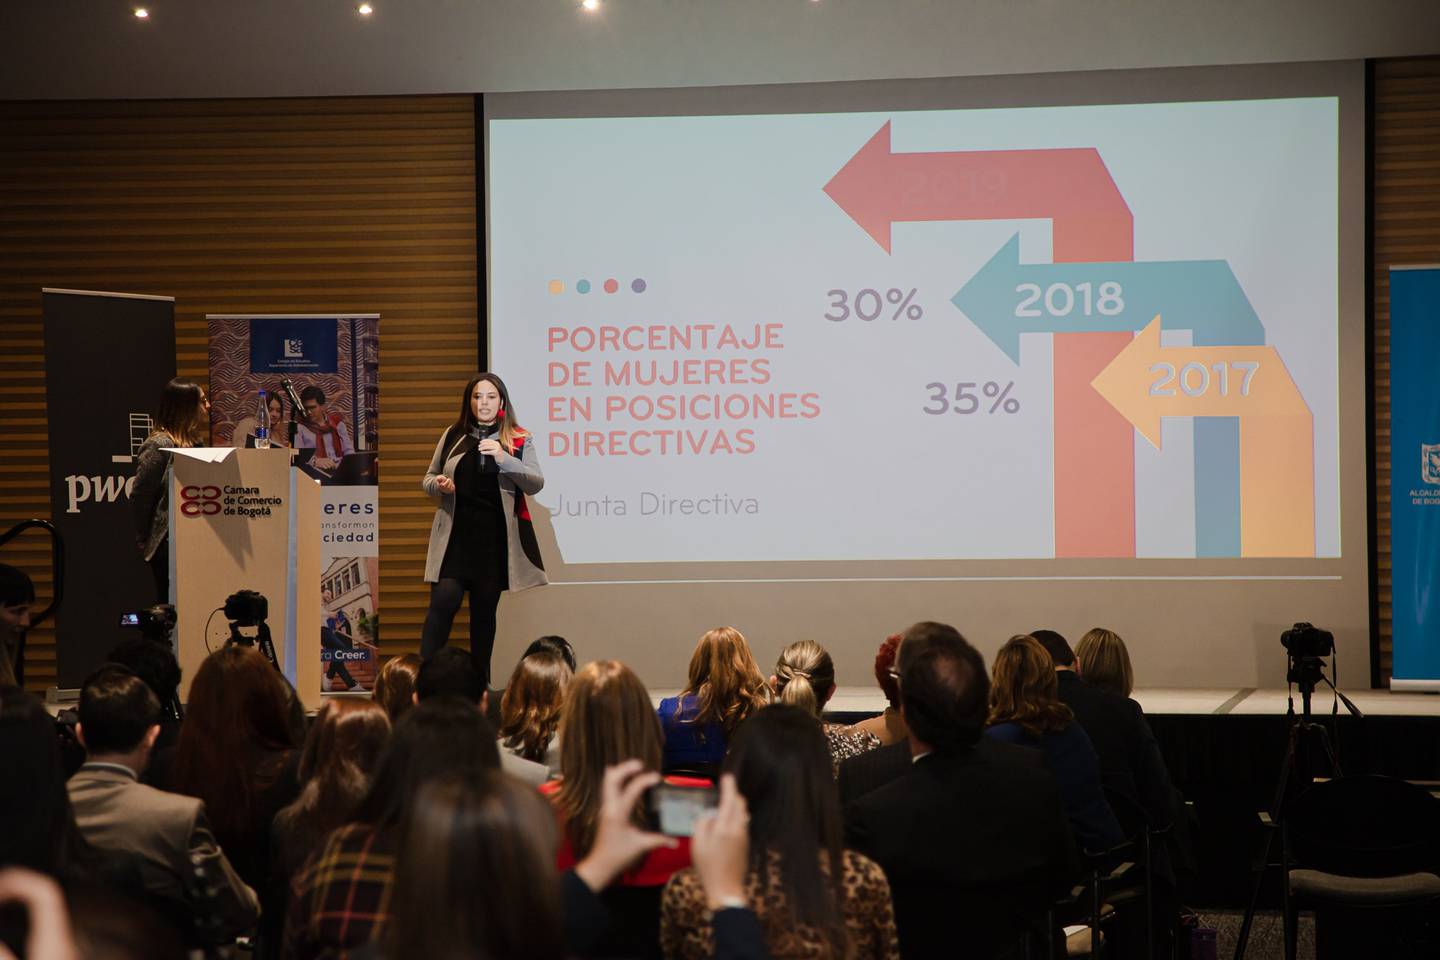 Aequales provides tools for companies to close gender gaps in the workplace in Latin America.dfd